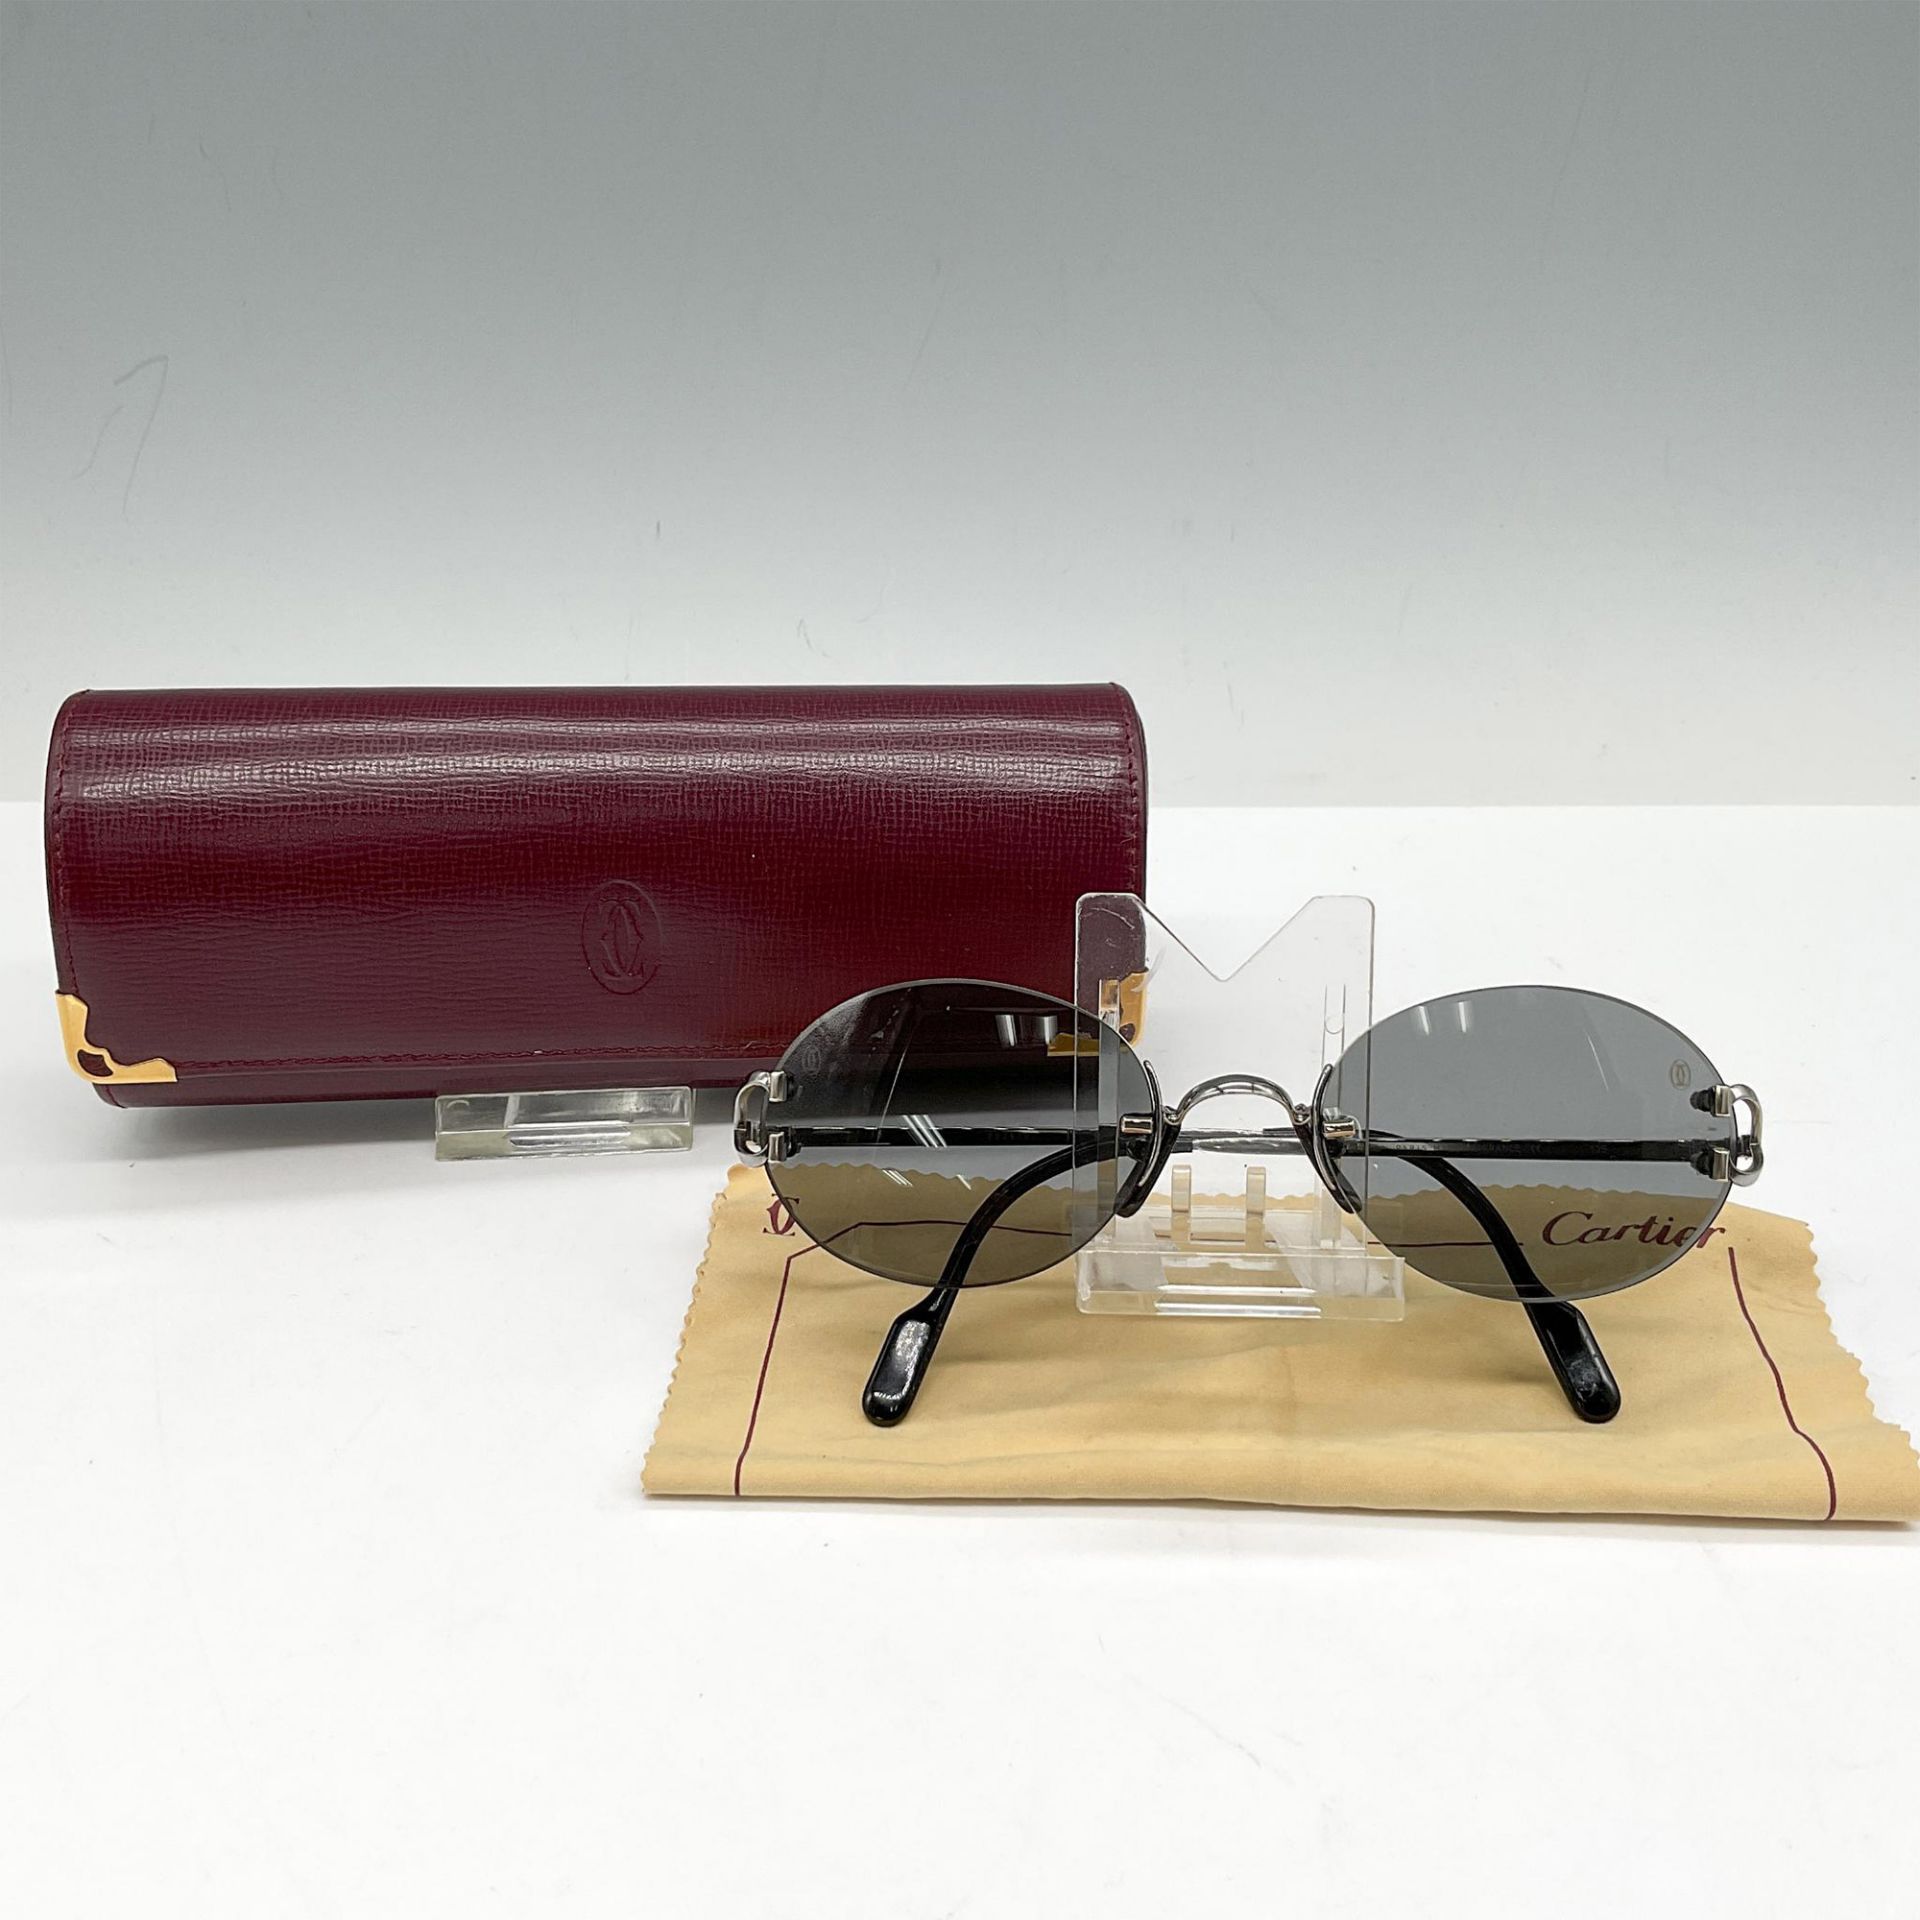 Cartier Scala Rimless Sunglasses with Case - Image 2 of 5